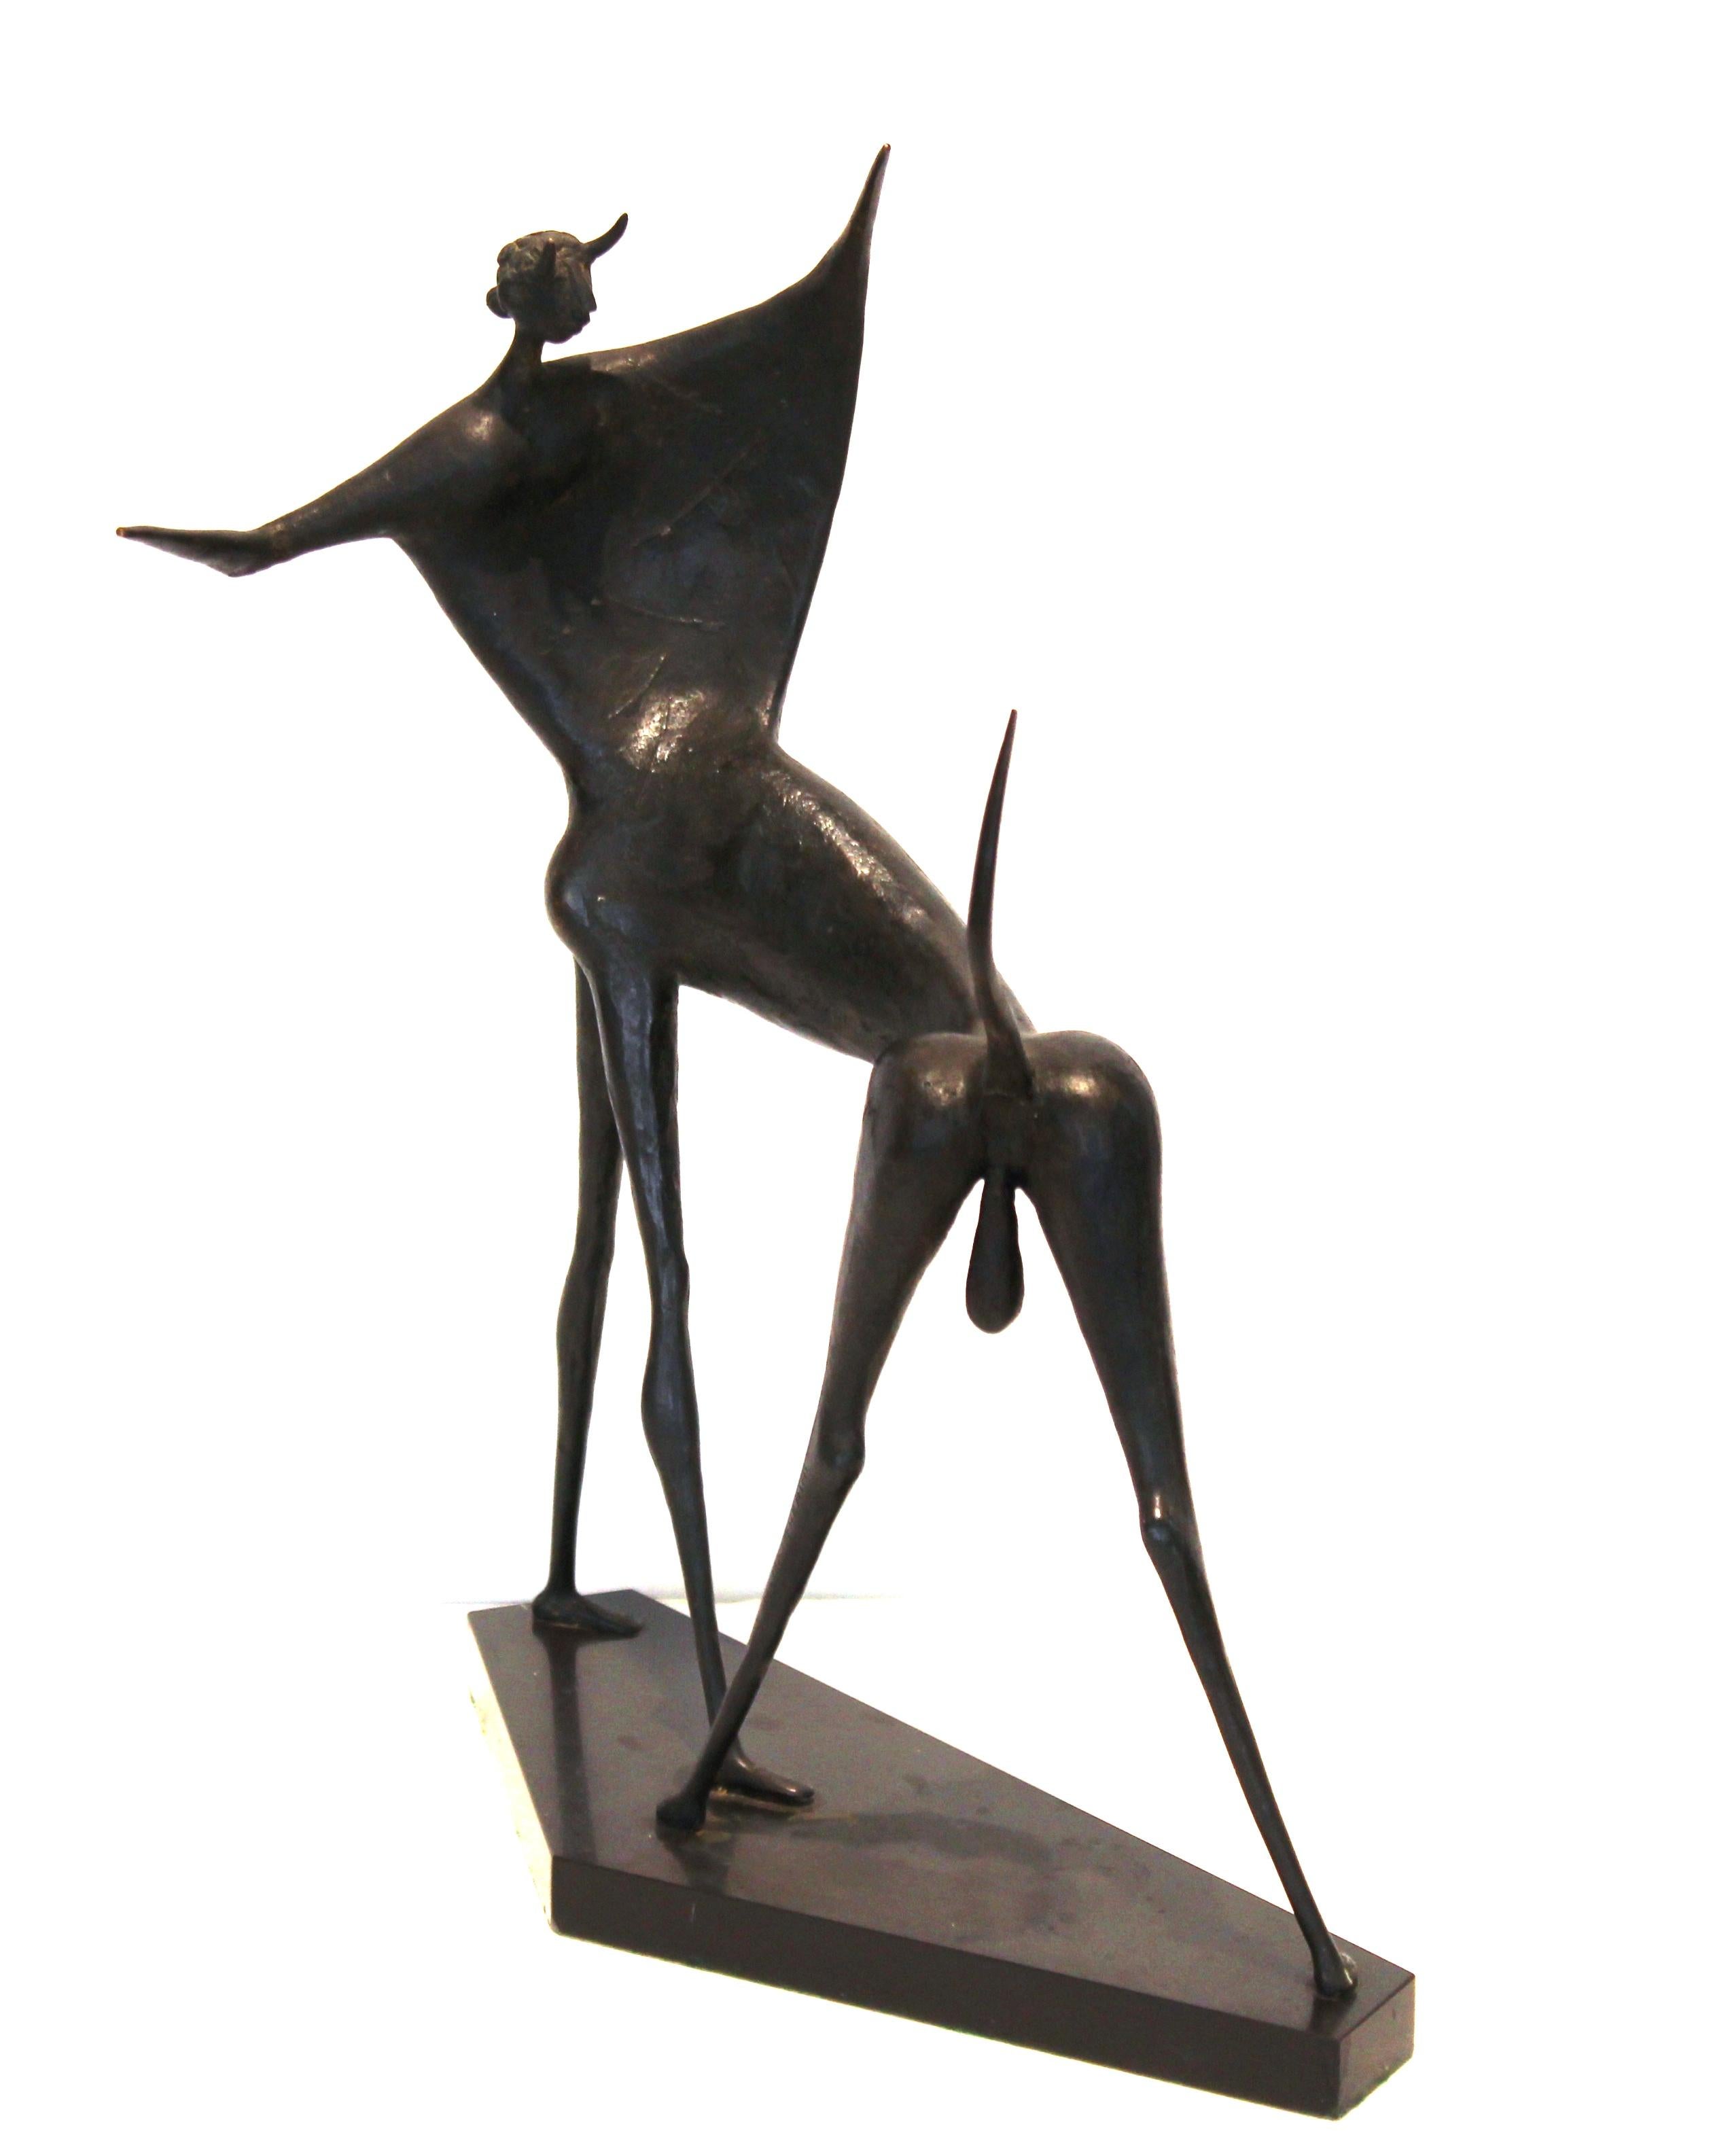 Italian midcentury bronze sculpture titled 'Corrida' and created by Marcello Mascherini (Italy 1906-1983) in 1957. The piece depicts an abstracted bullfighter in movement and is mounted on a black marble base. Signed by the artist on the leg